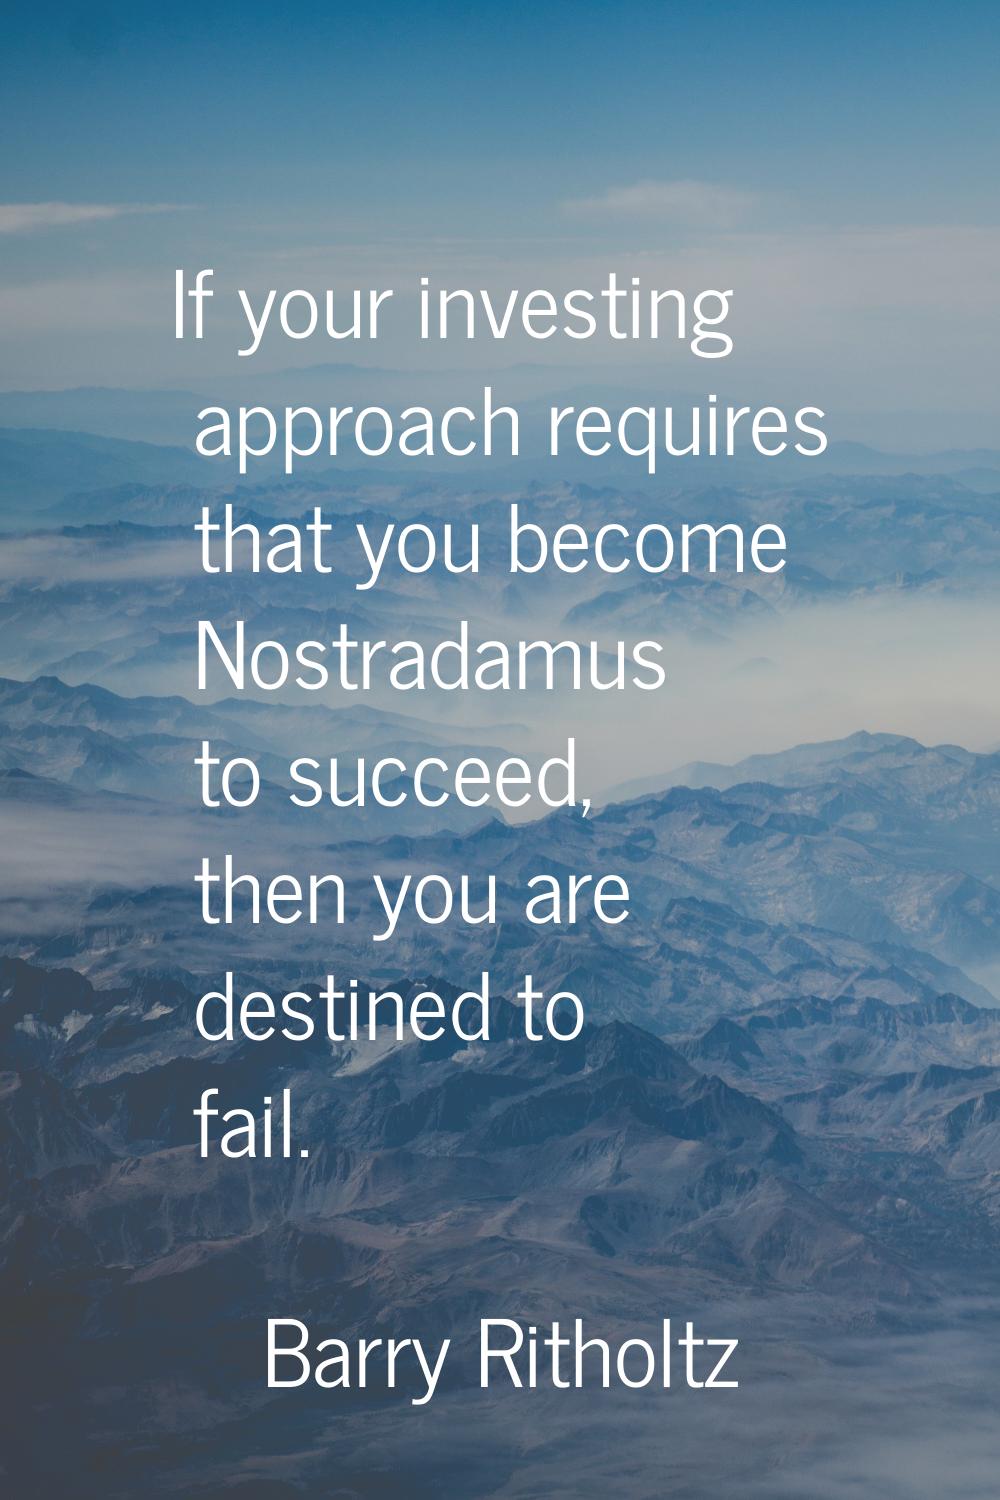 If your investing approach requires that you become Nostradamus to succeed, then you are destined t